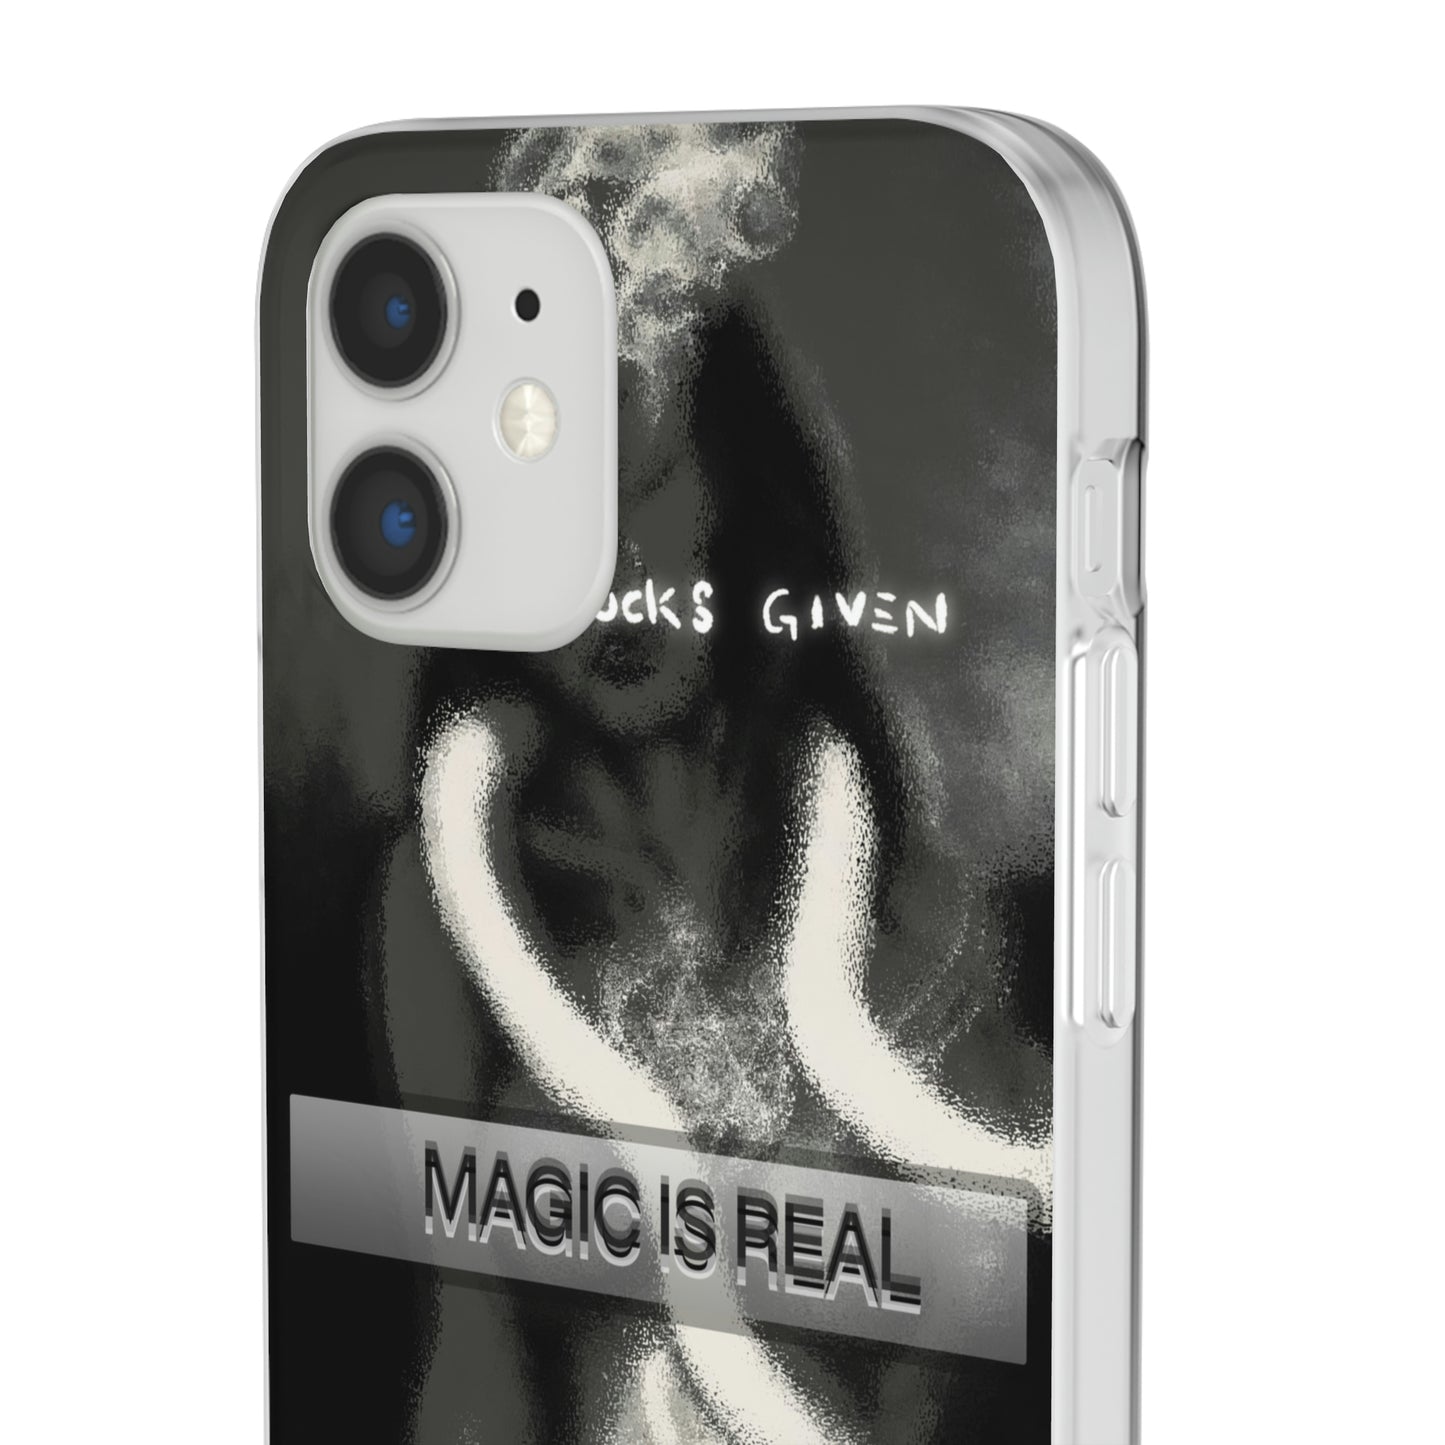 Real Given Phone Case